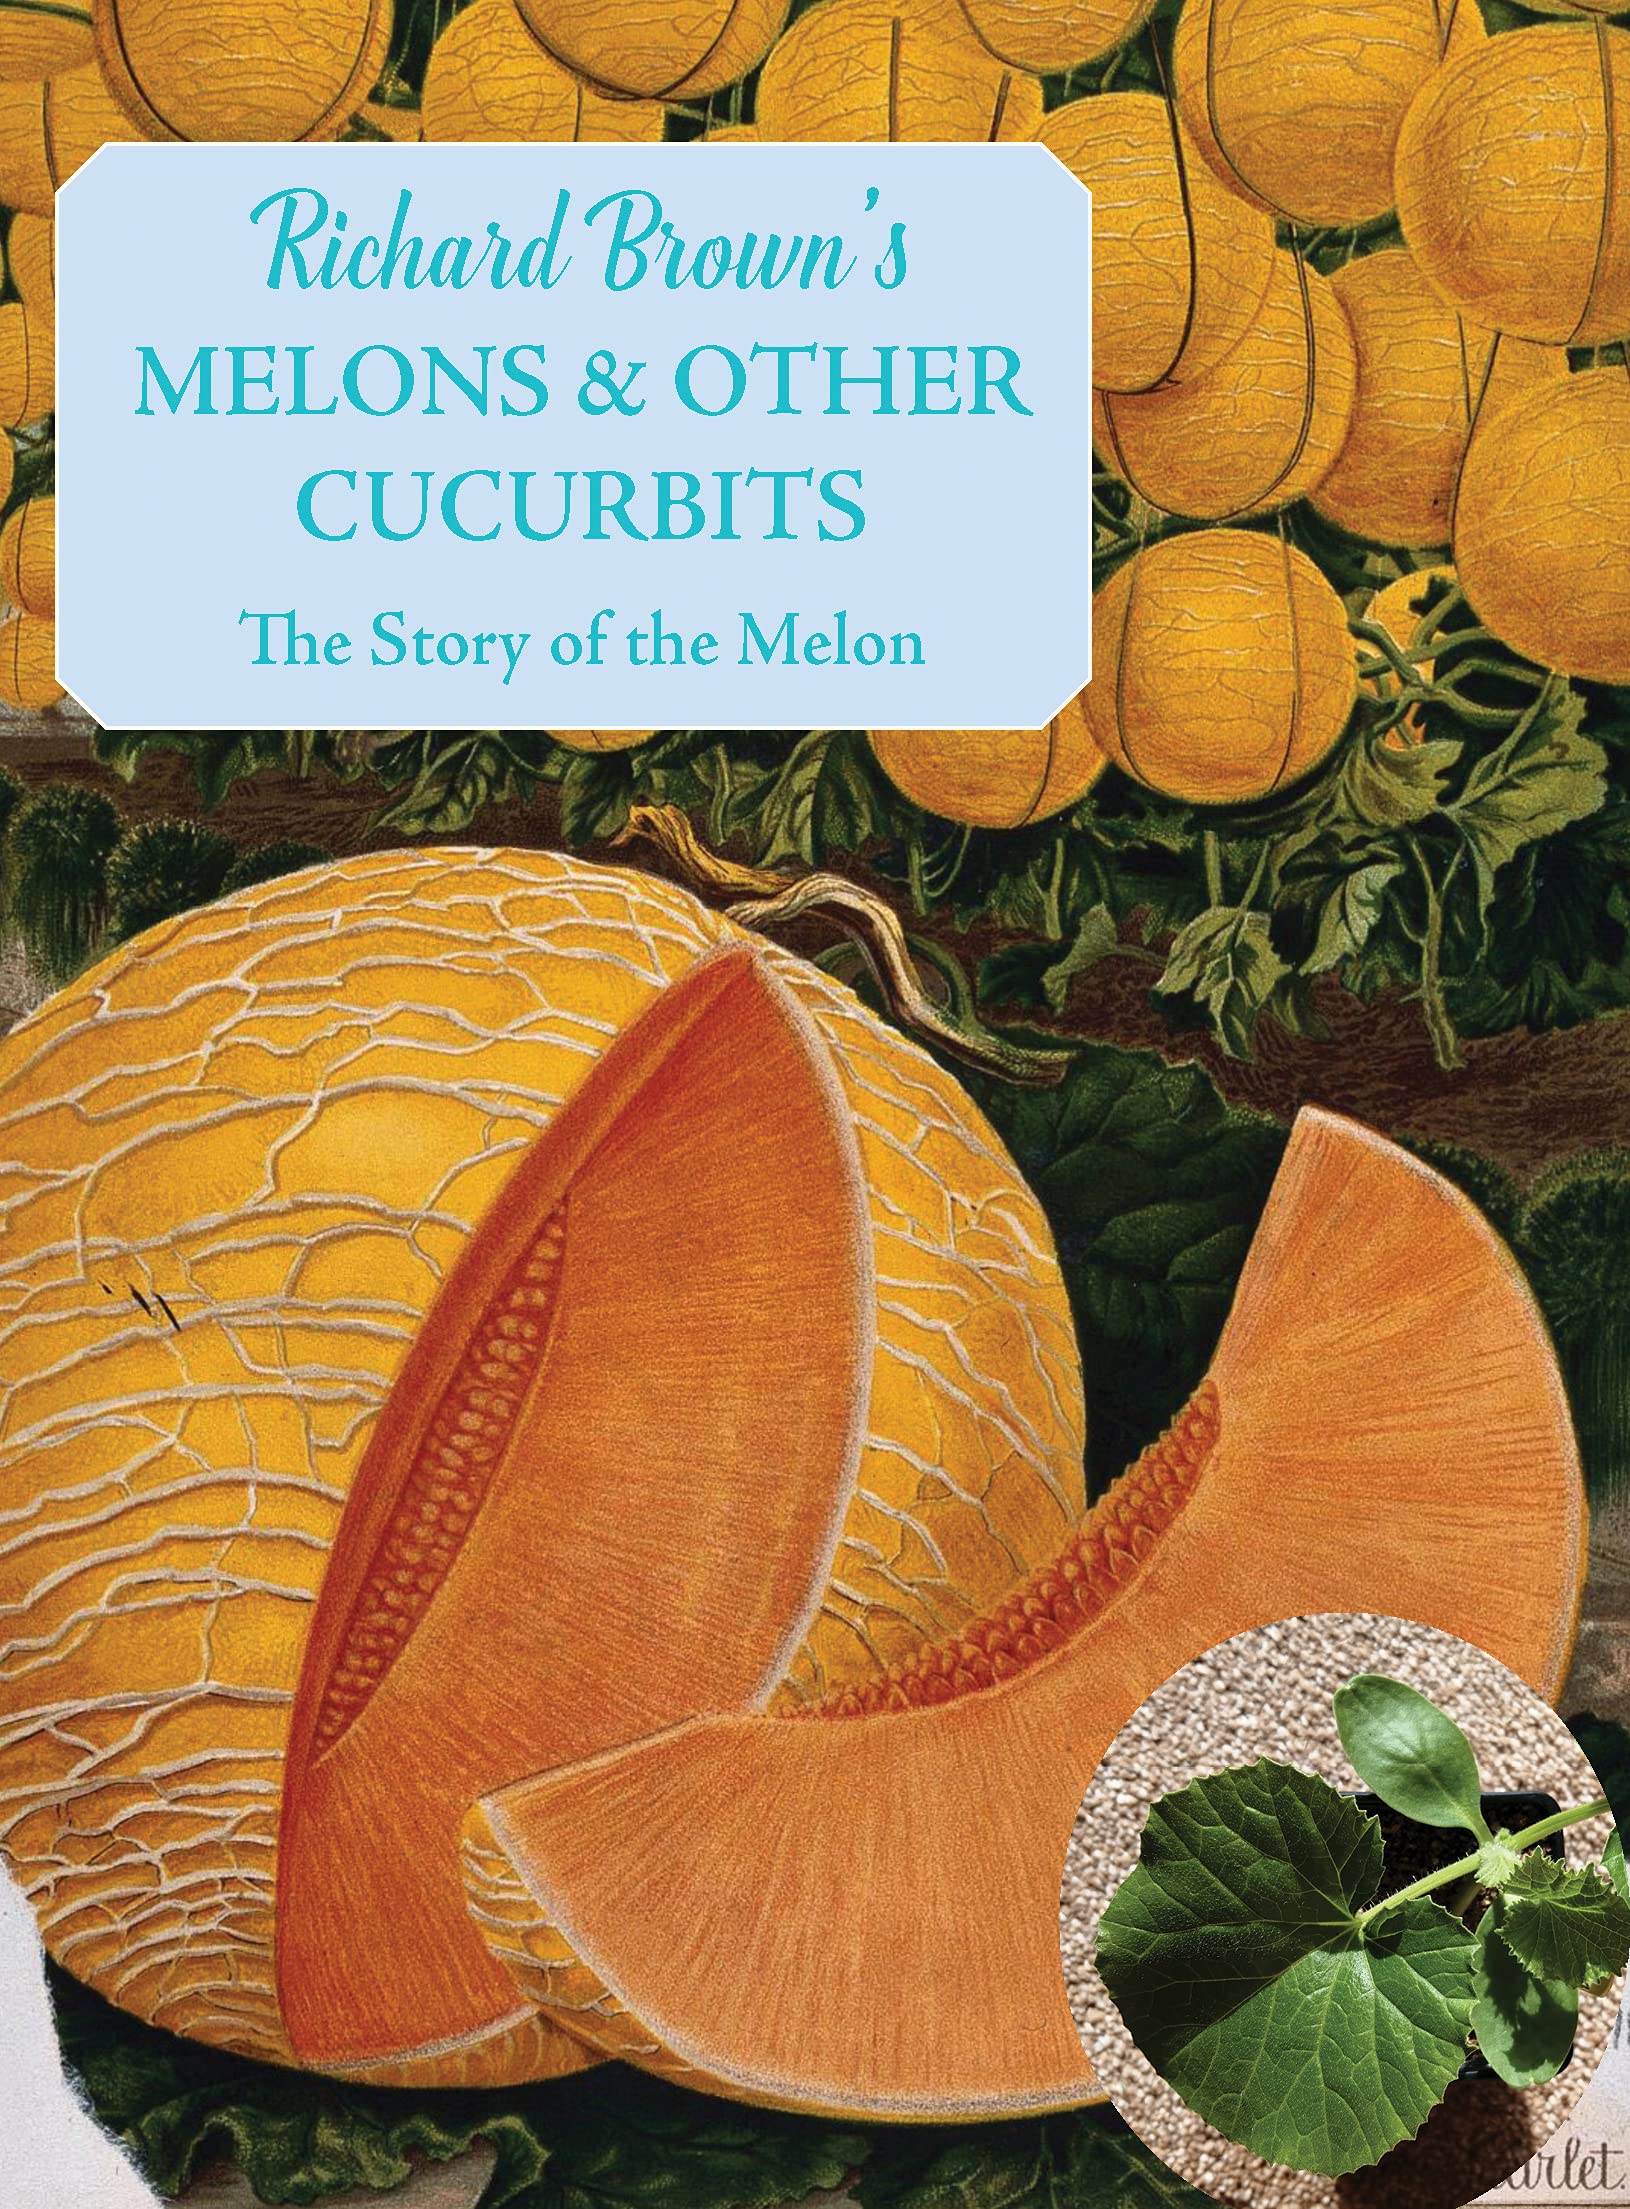 Melons & Other Cucurbits: Growing and Cooking (Richard Brown)